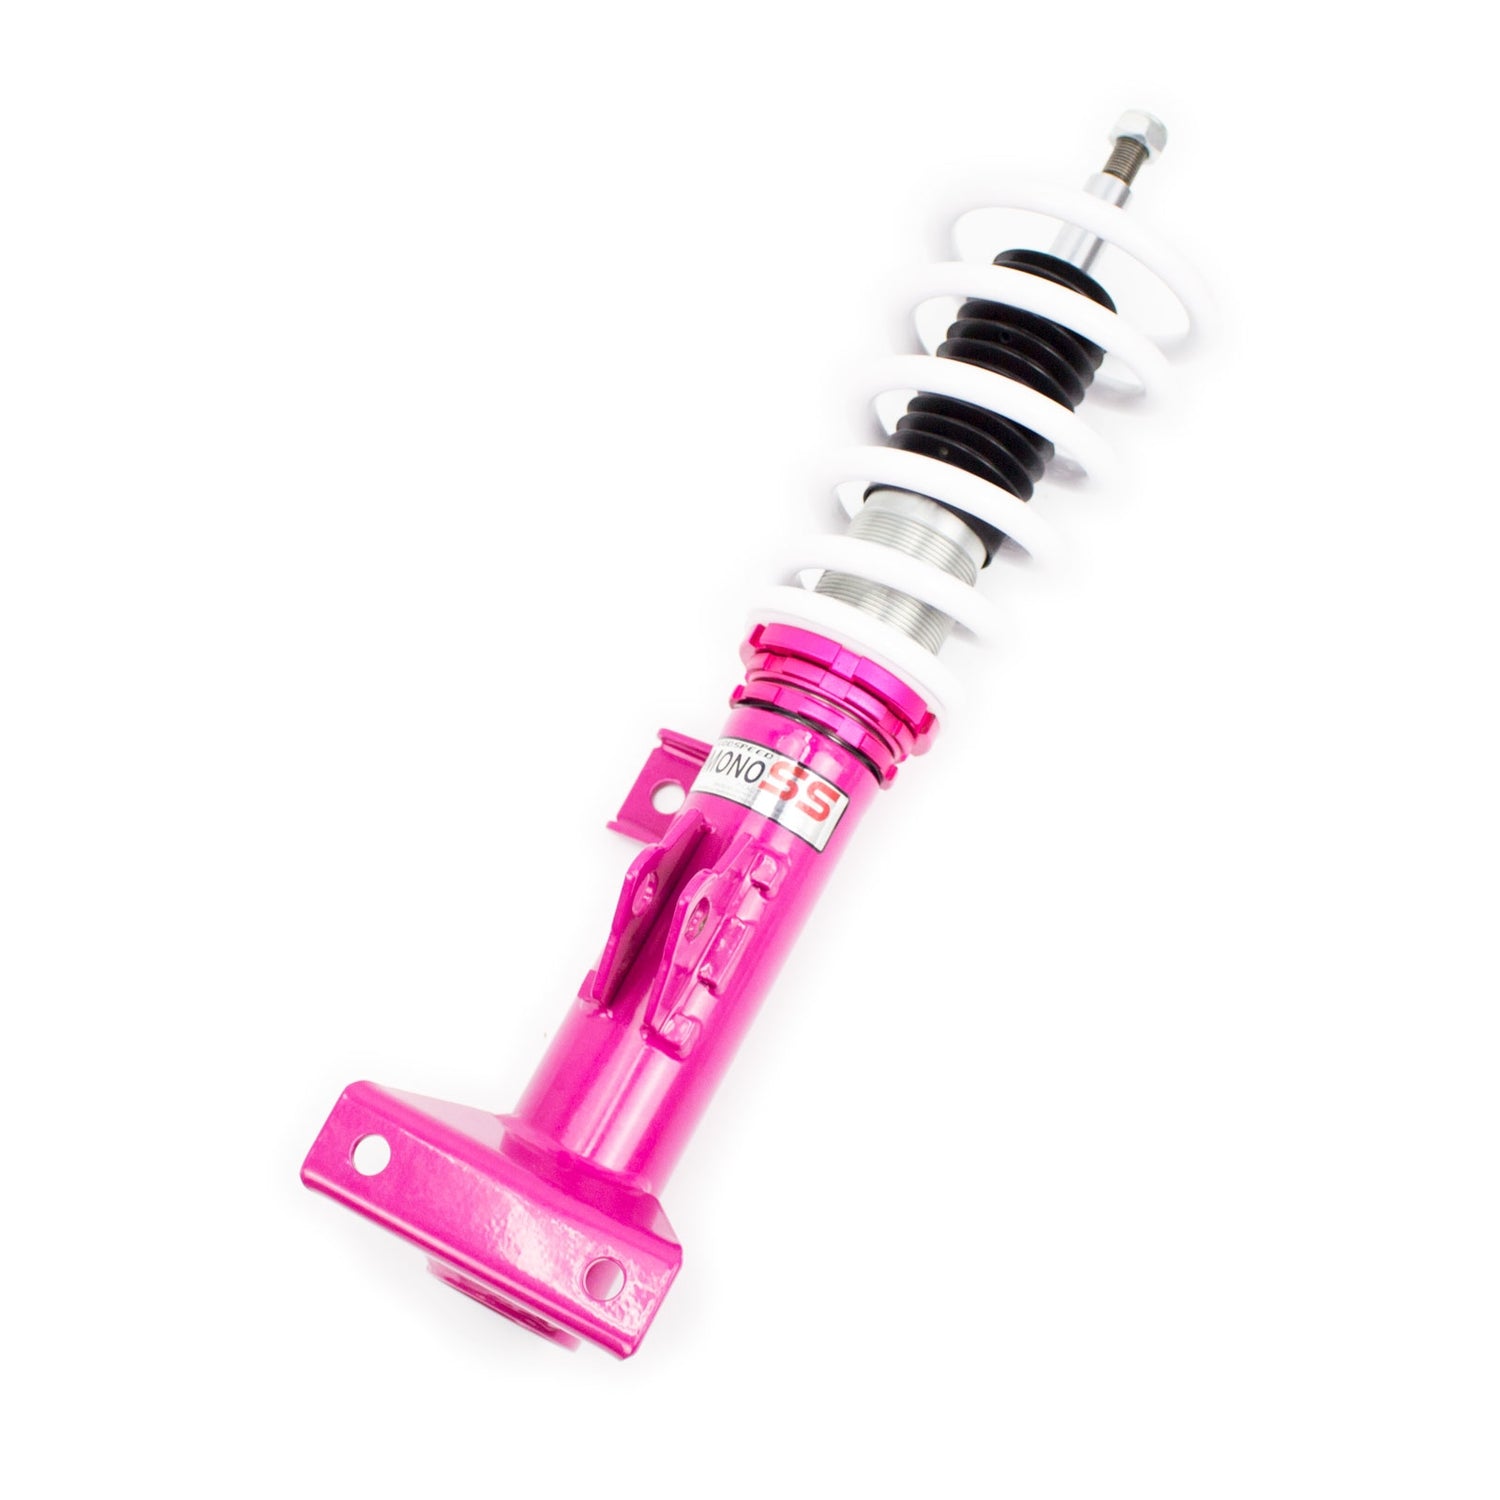 Godspeed MSS0172-A MonoSS Coilover Lowering Kit, Fully Adjustable, Ride Height, Spring Tension And 16 Click Damping, Mercedes-Benz C-Class Sedan(W204) 07-14